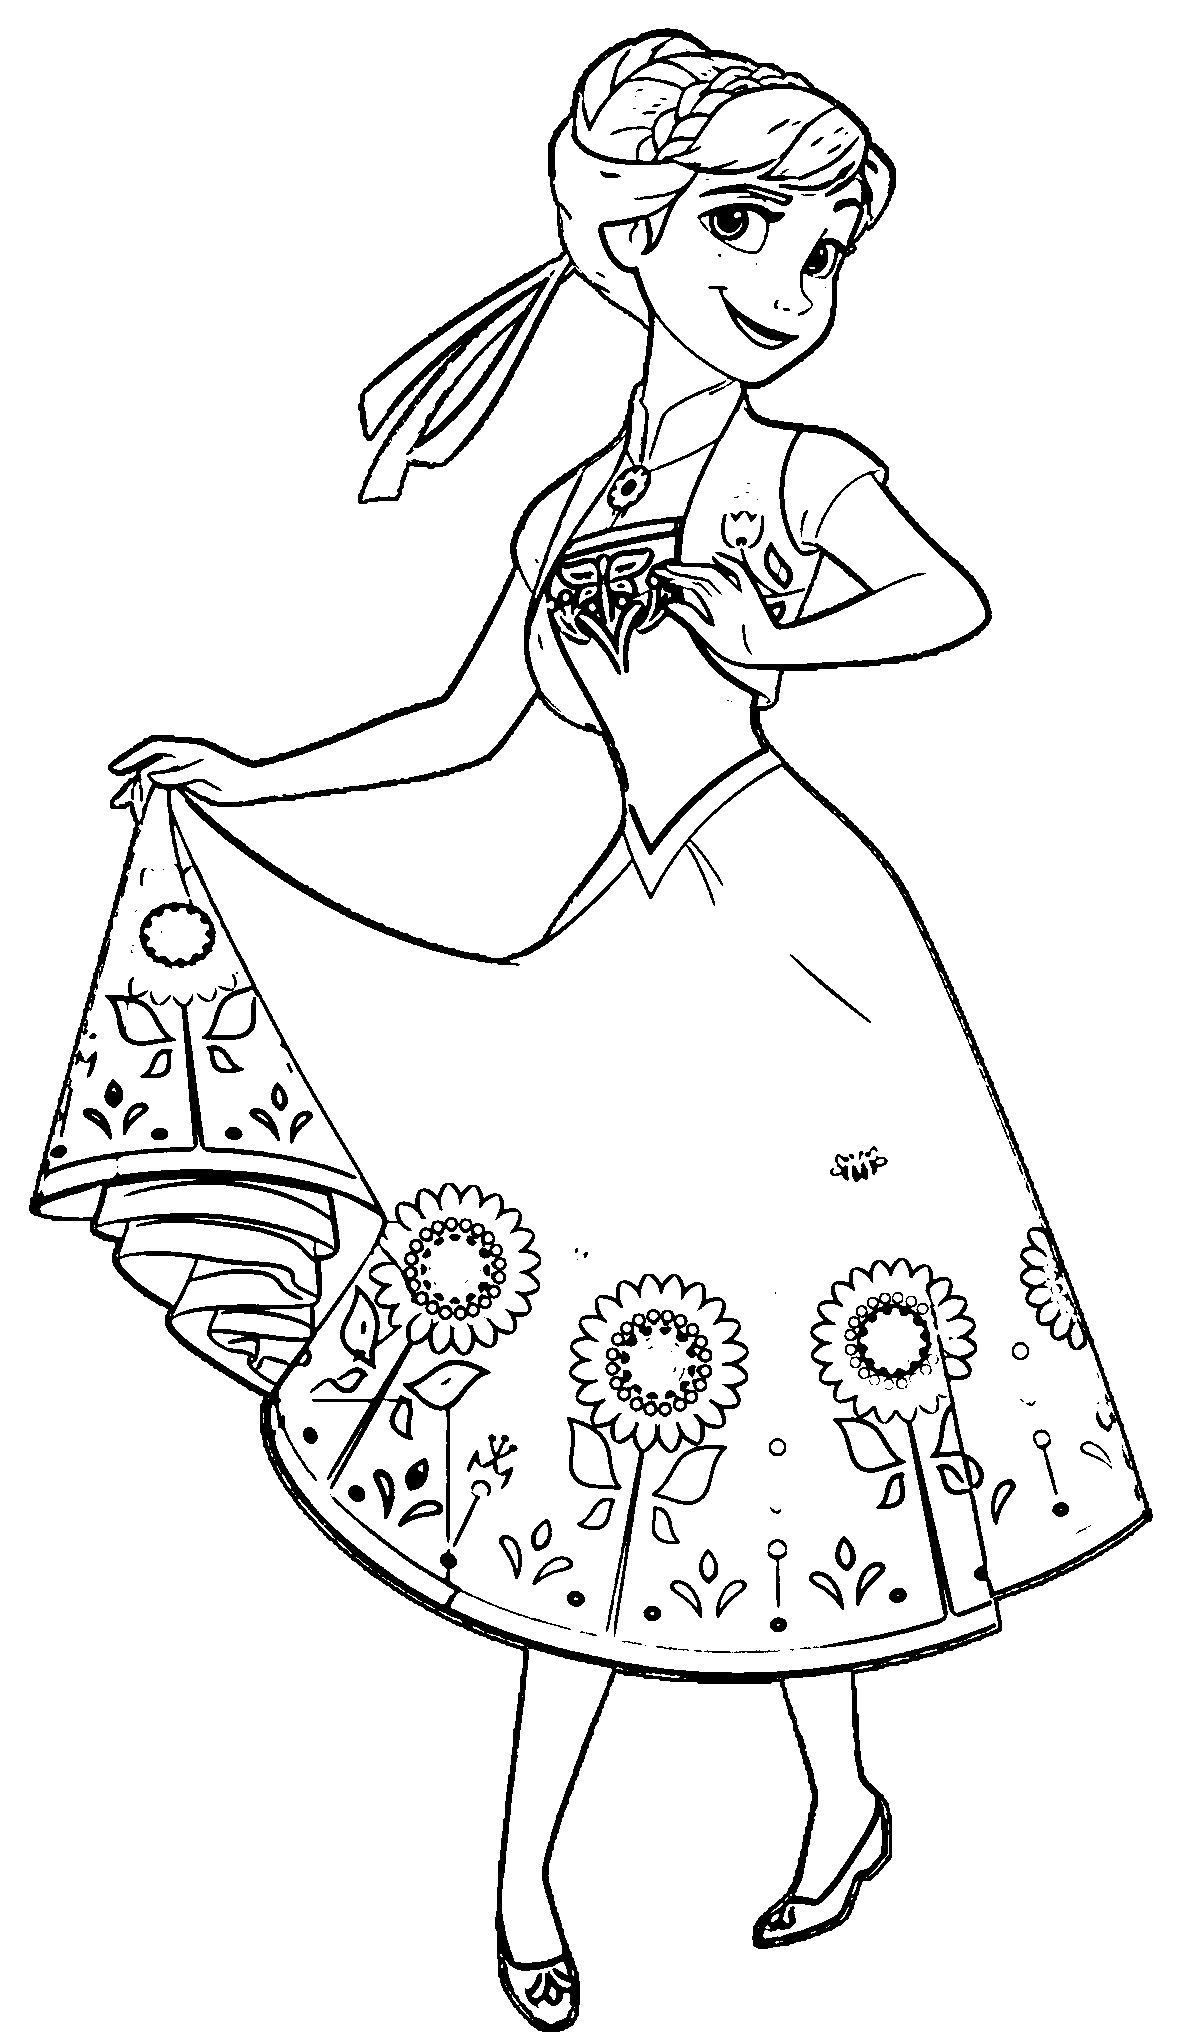 Fever Anna Lift Skirt Coloring Page Wecoloringpage Elsa Coloring Pages Disney Colorin